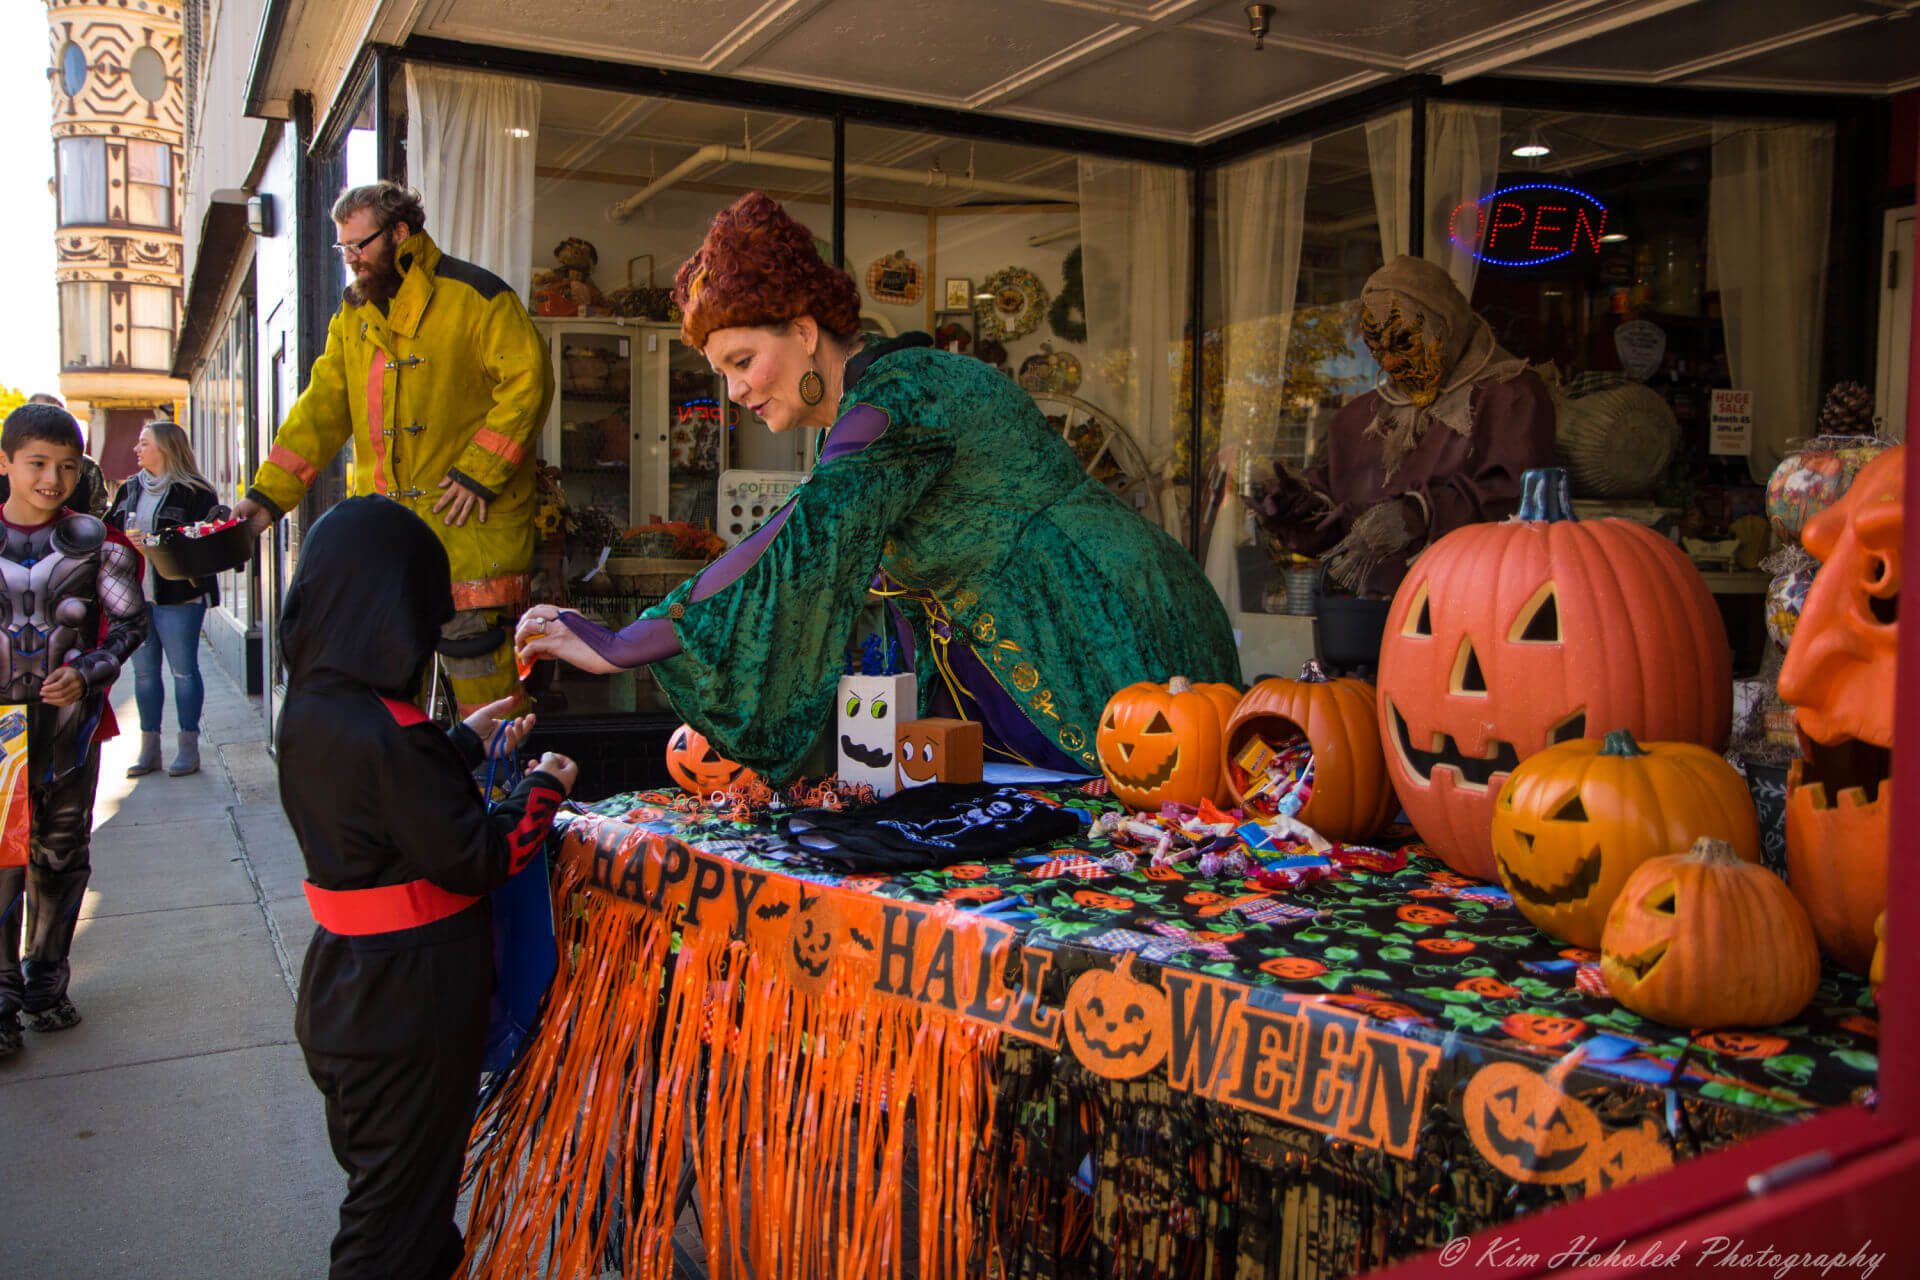 A costumed woman, standing behind a table filled with jack-o-lanterns, hands a piece of candy to a young trick-or-treater in downtown Janesville.